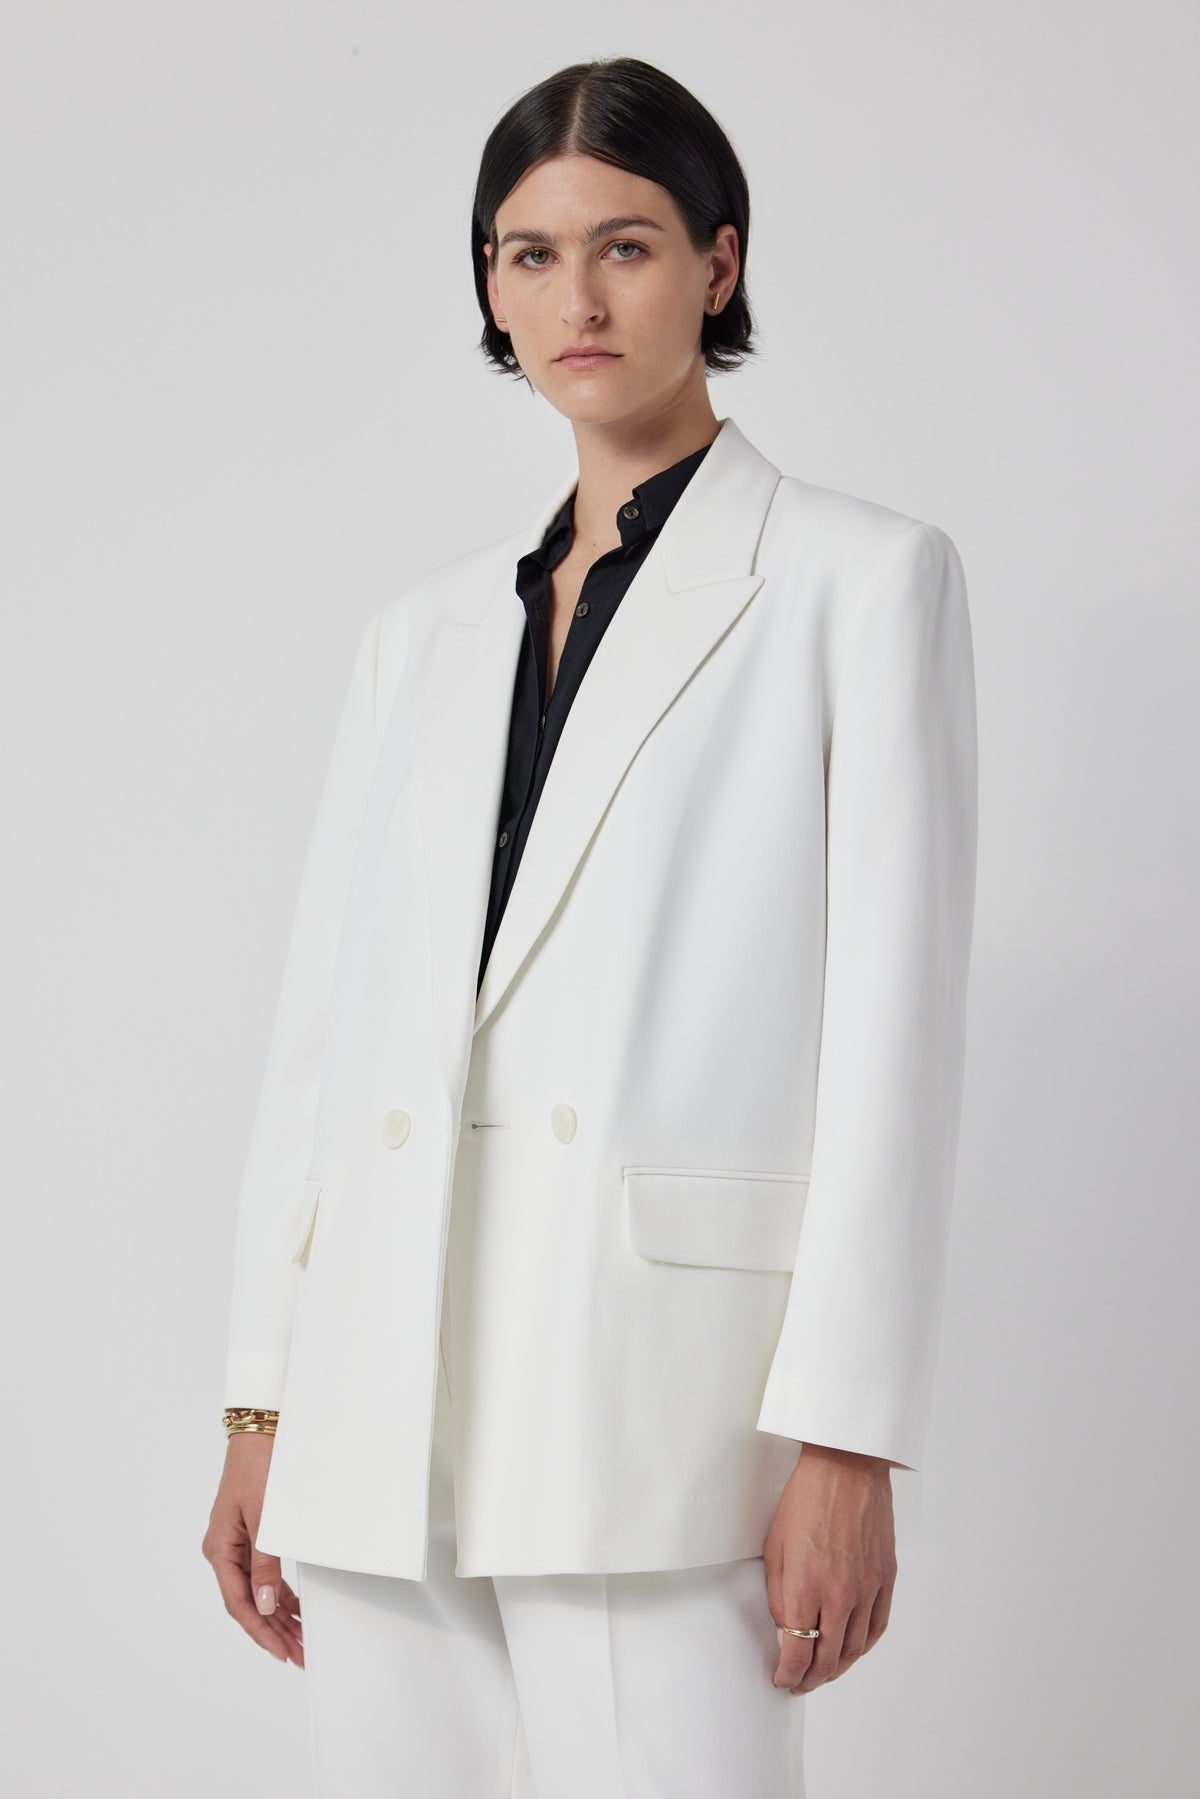   A woman wearing a white Fairfax blazer by Velvet by Jenny Graham. 